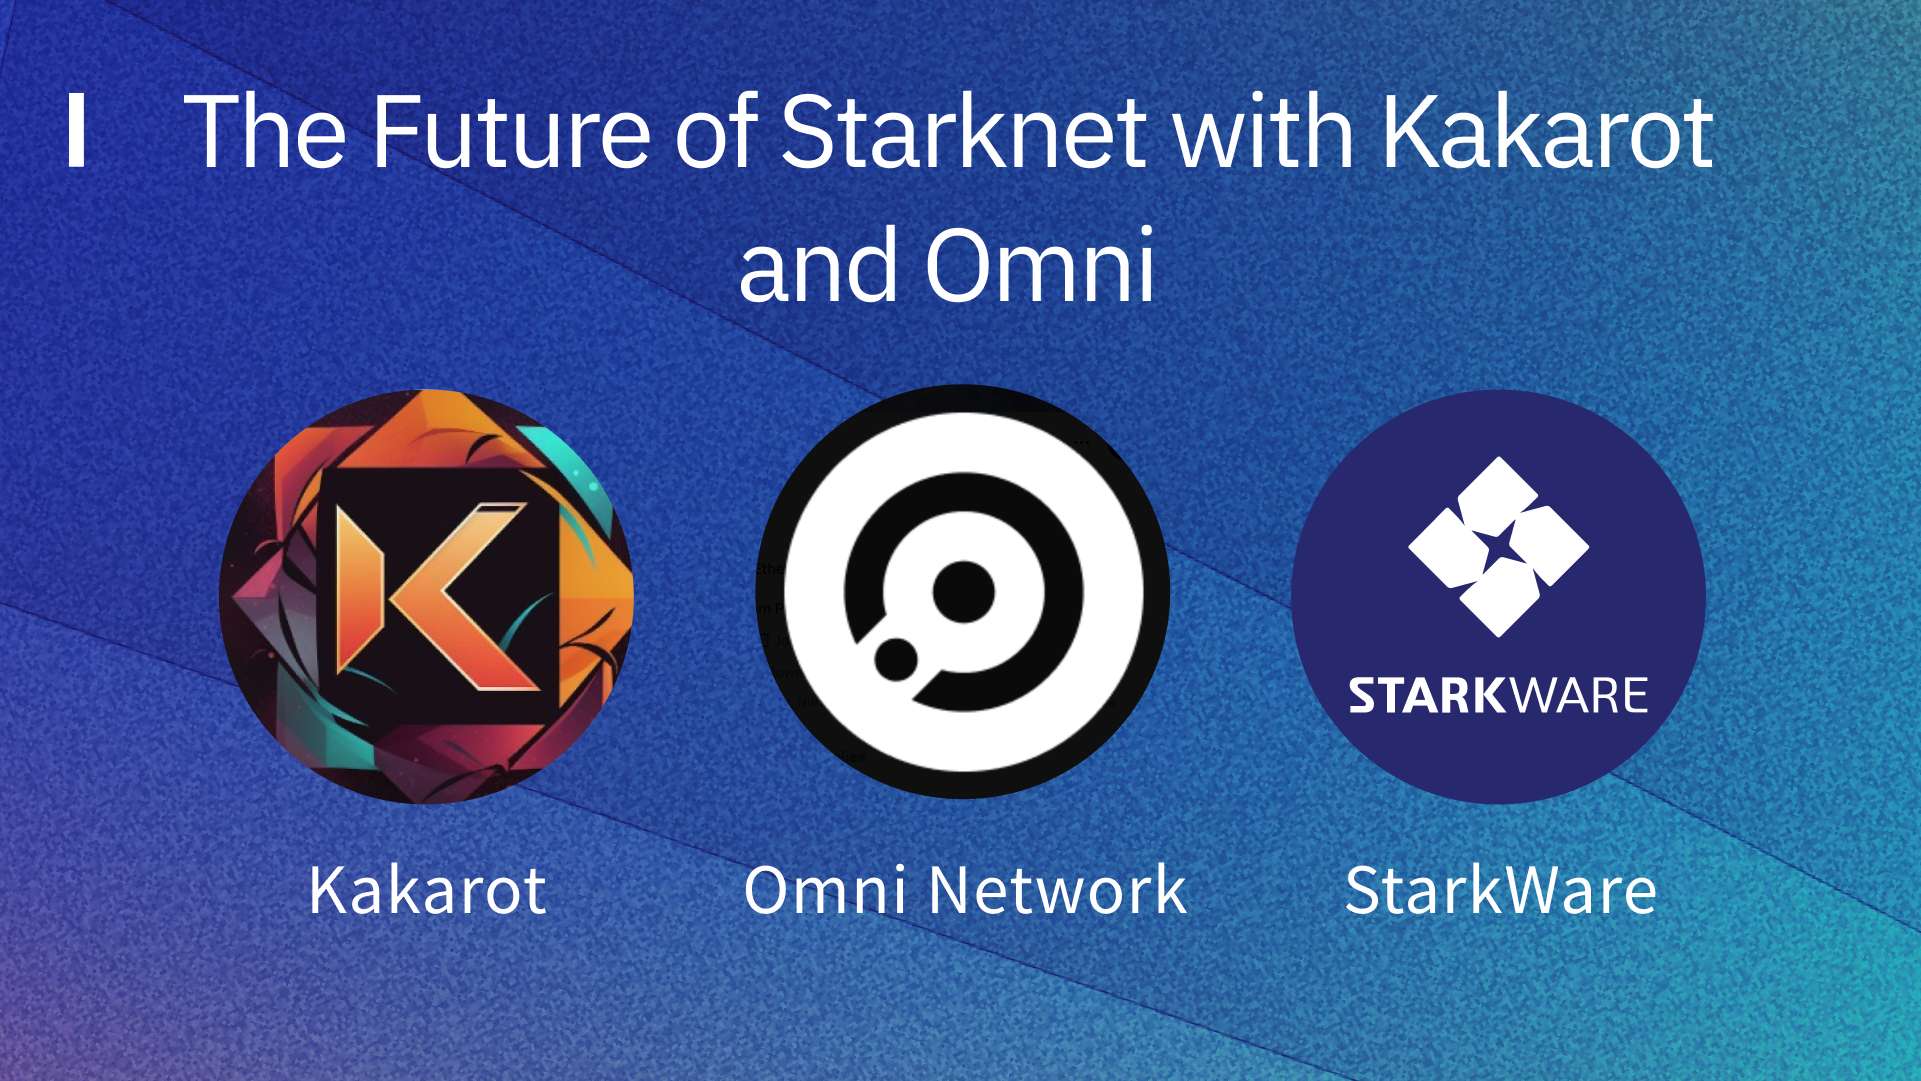 Twitter Space: The Future of Starknet with Kakarot and Omni